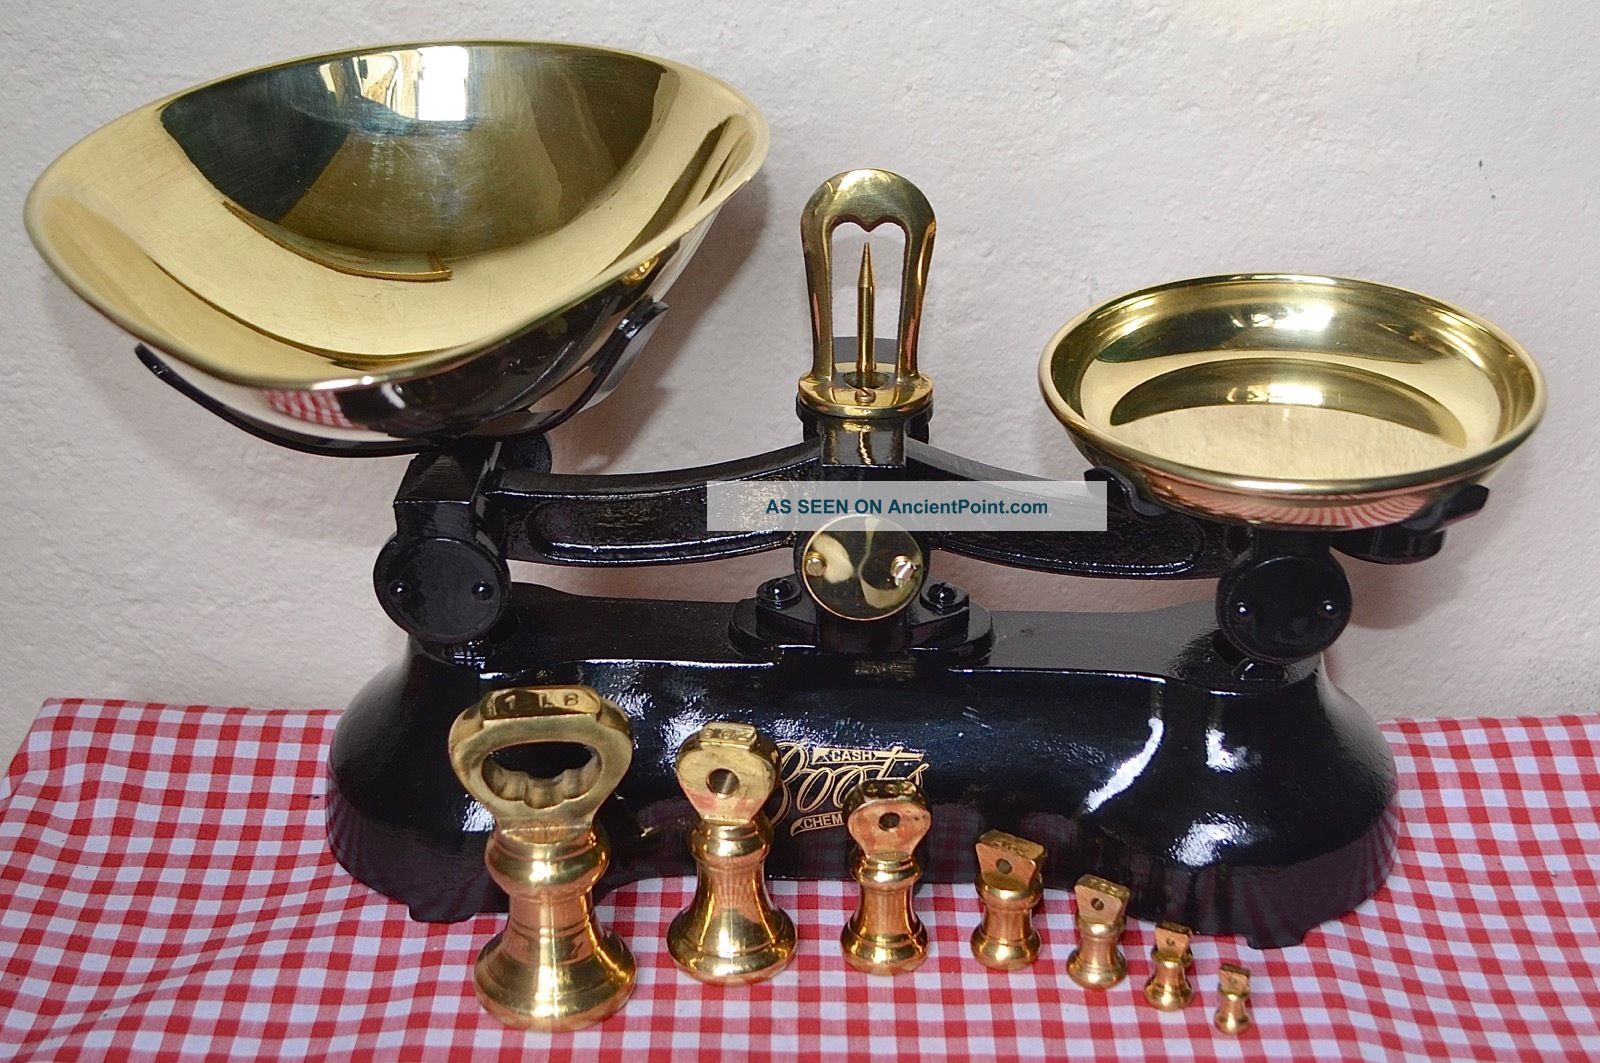 Vintage English Black Boots Cash Chemists Kitchen Scales 7 Brass Bell Weights Scales photo